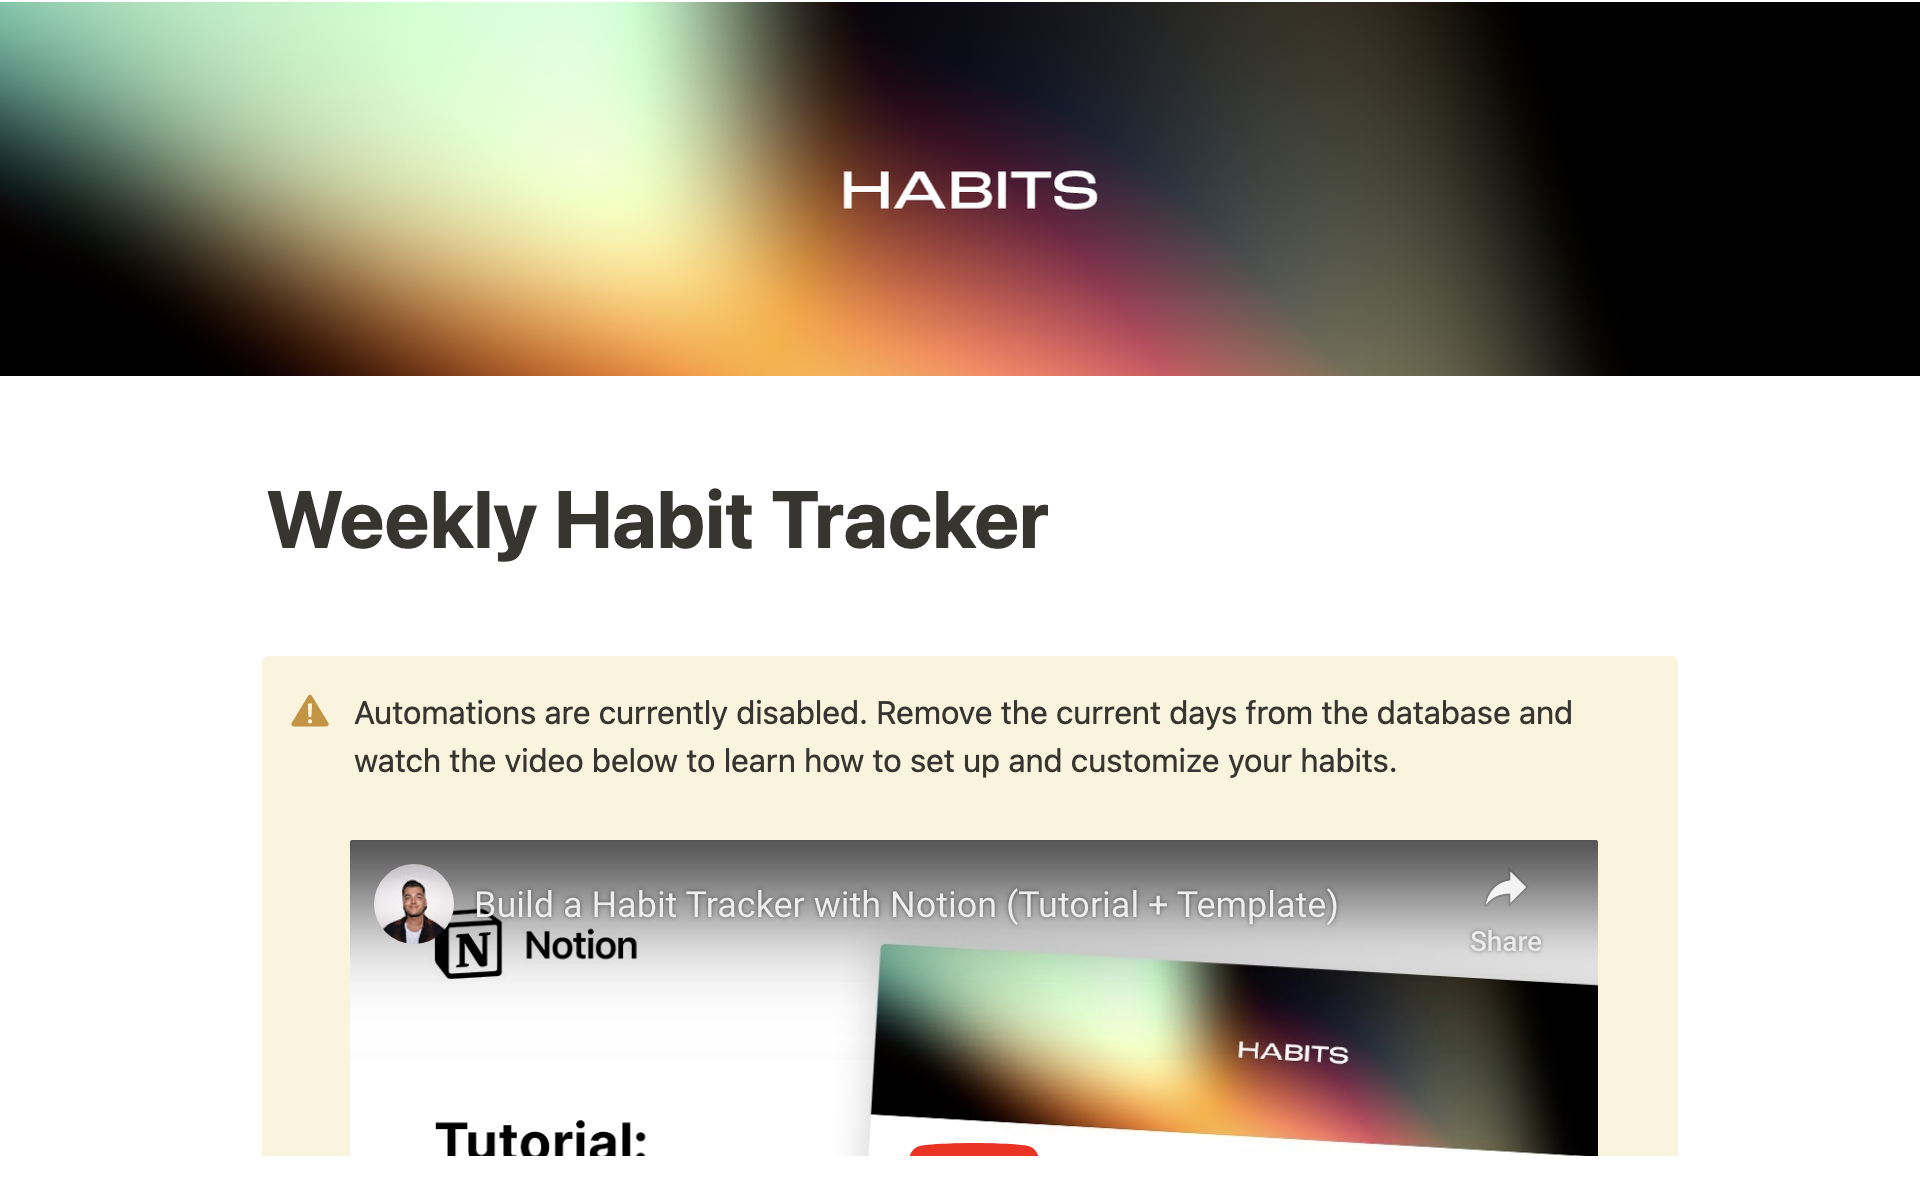 Build better habits with Notion.